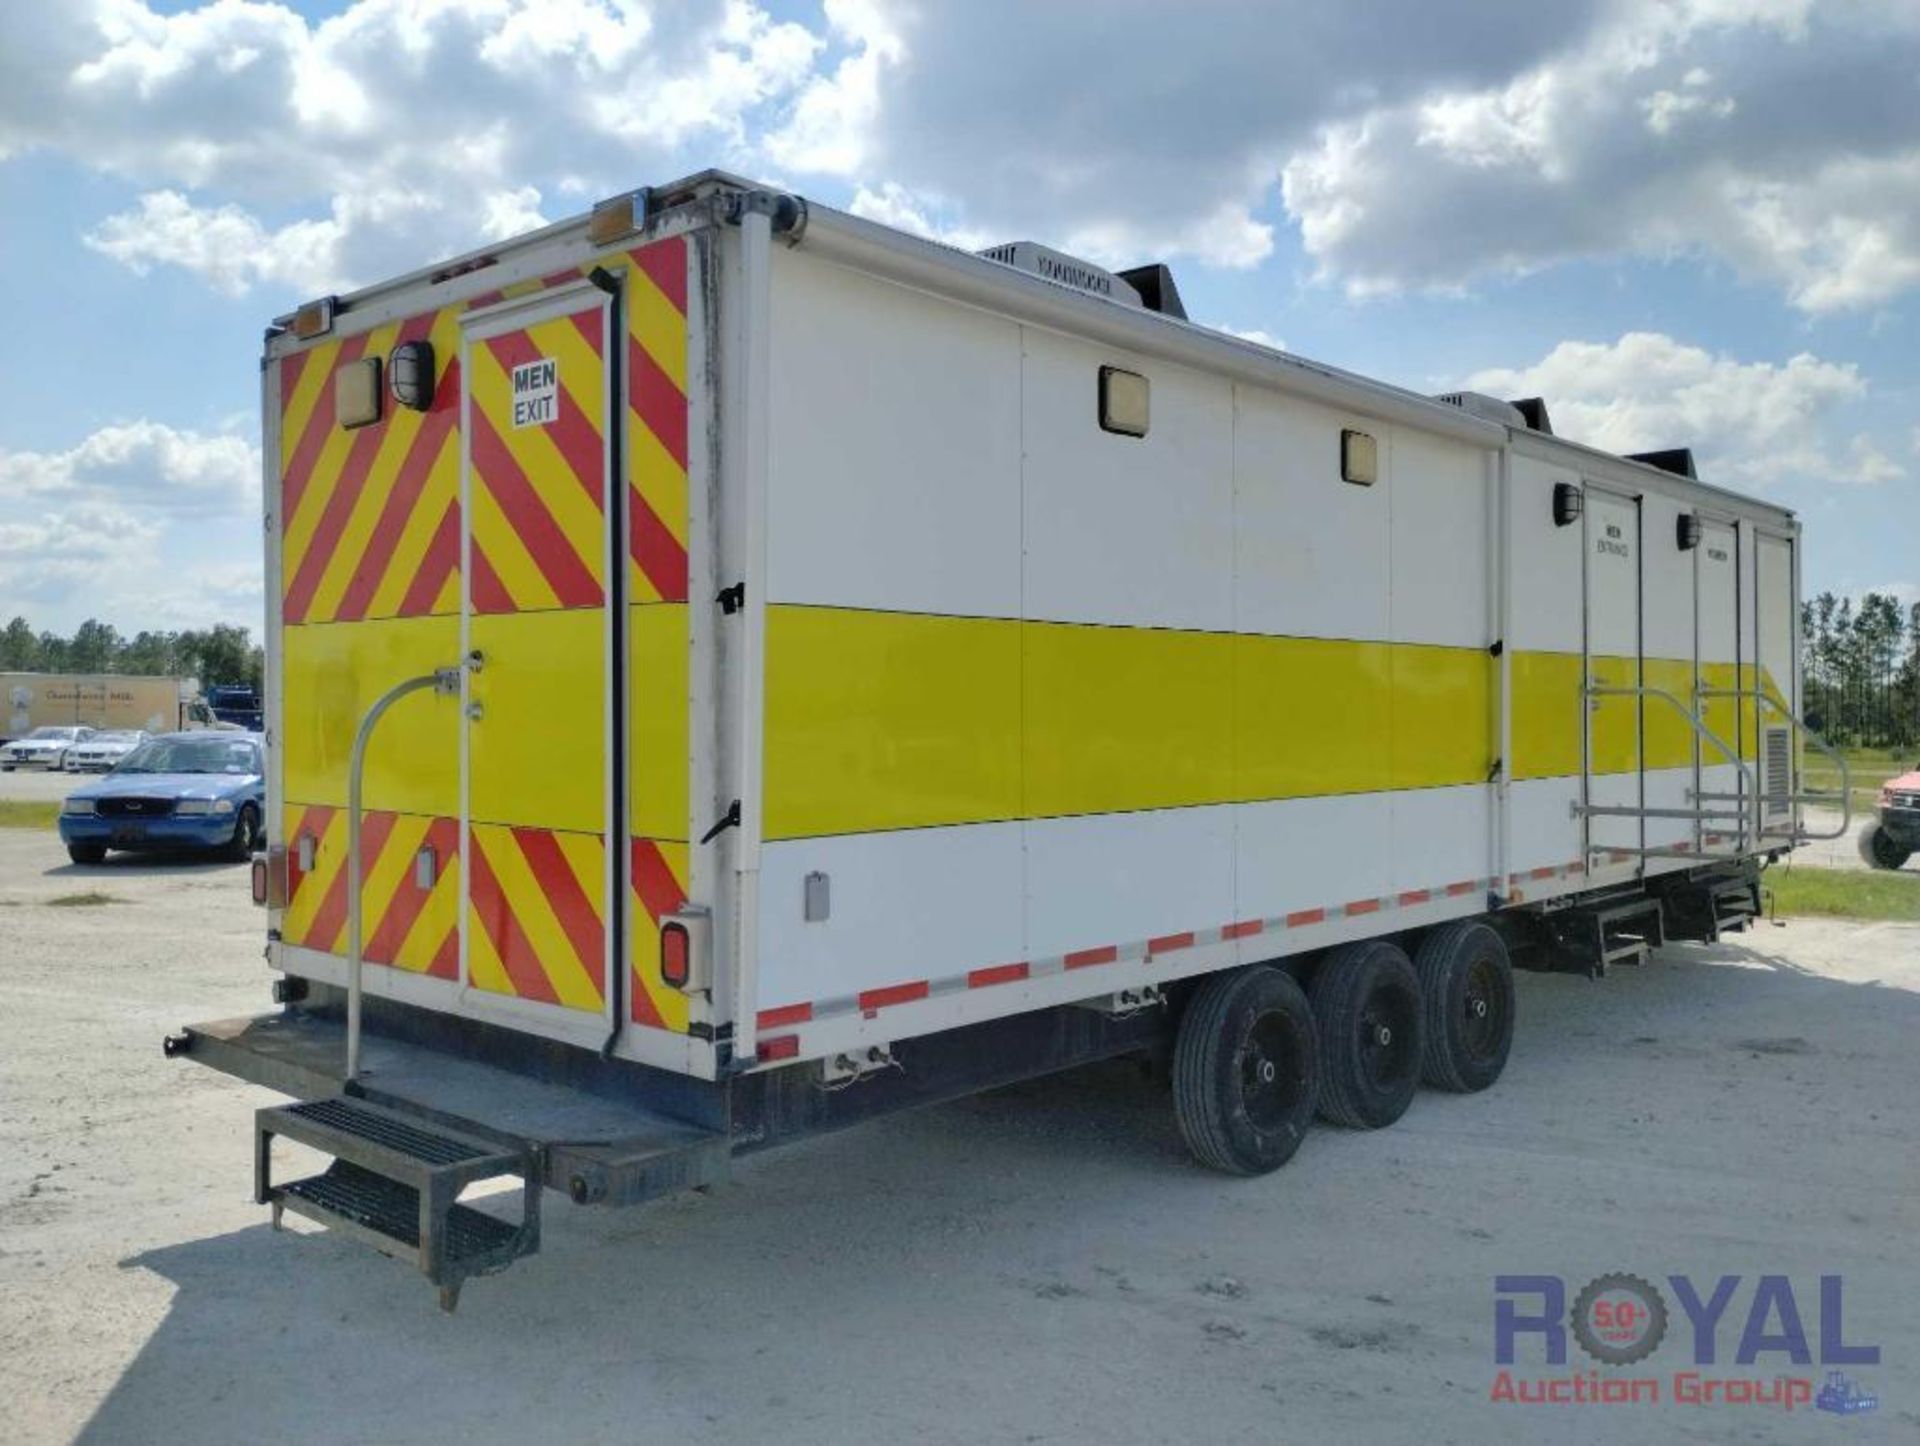 Fire/Rescue Portable Bathroom and Shower Trailer - Image 6 of 50